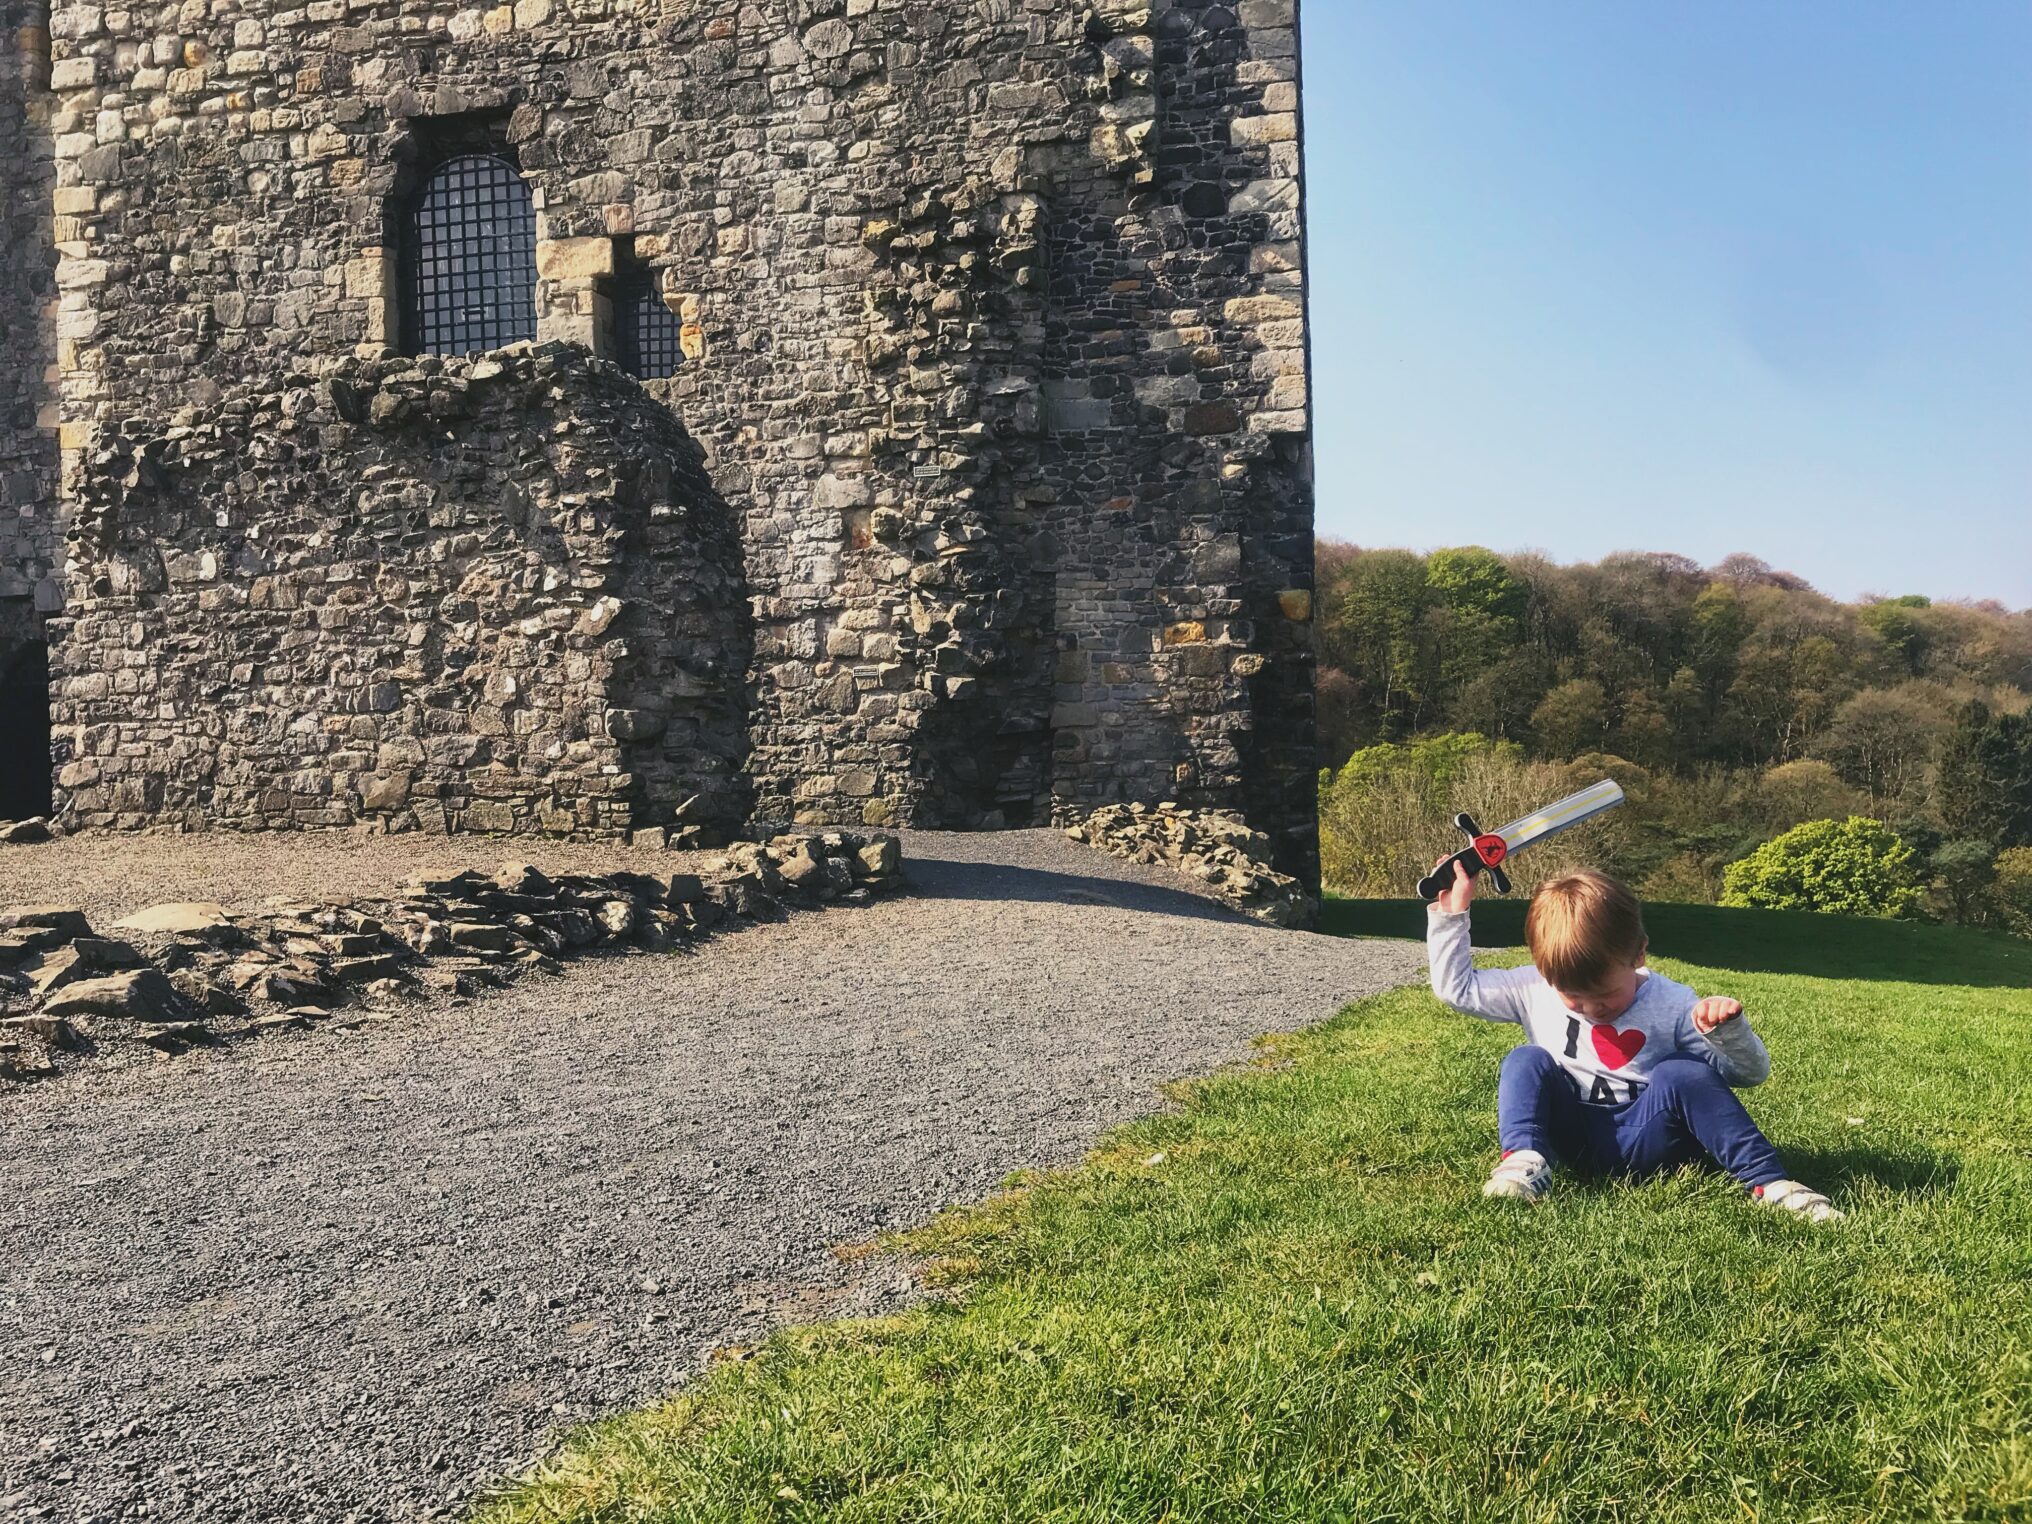 Dexter sat on grass outside Dundonald castle holding a plastic sword in the air